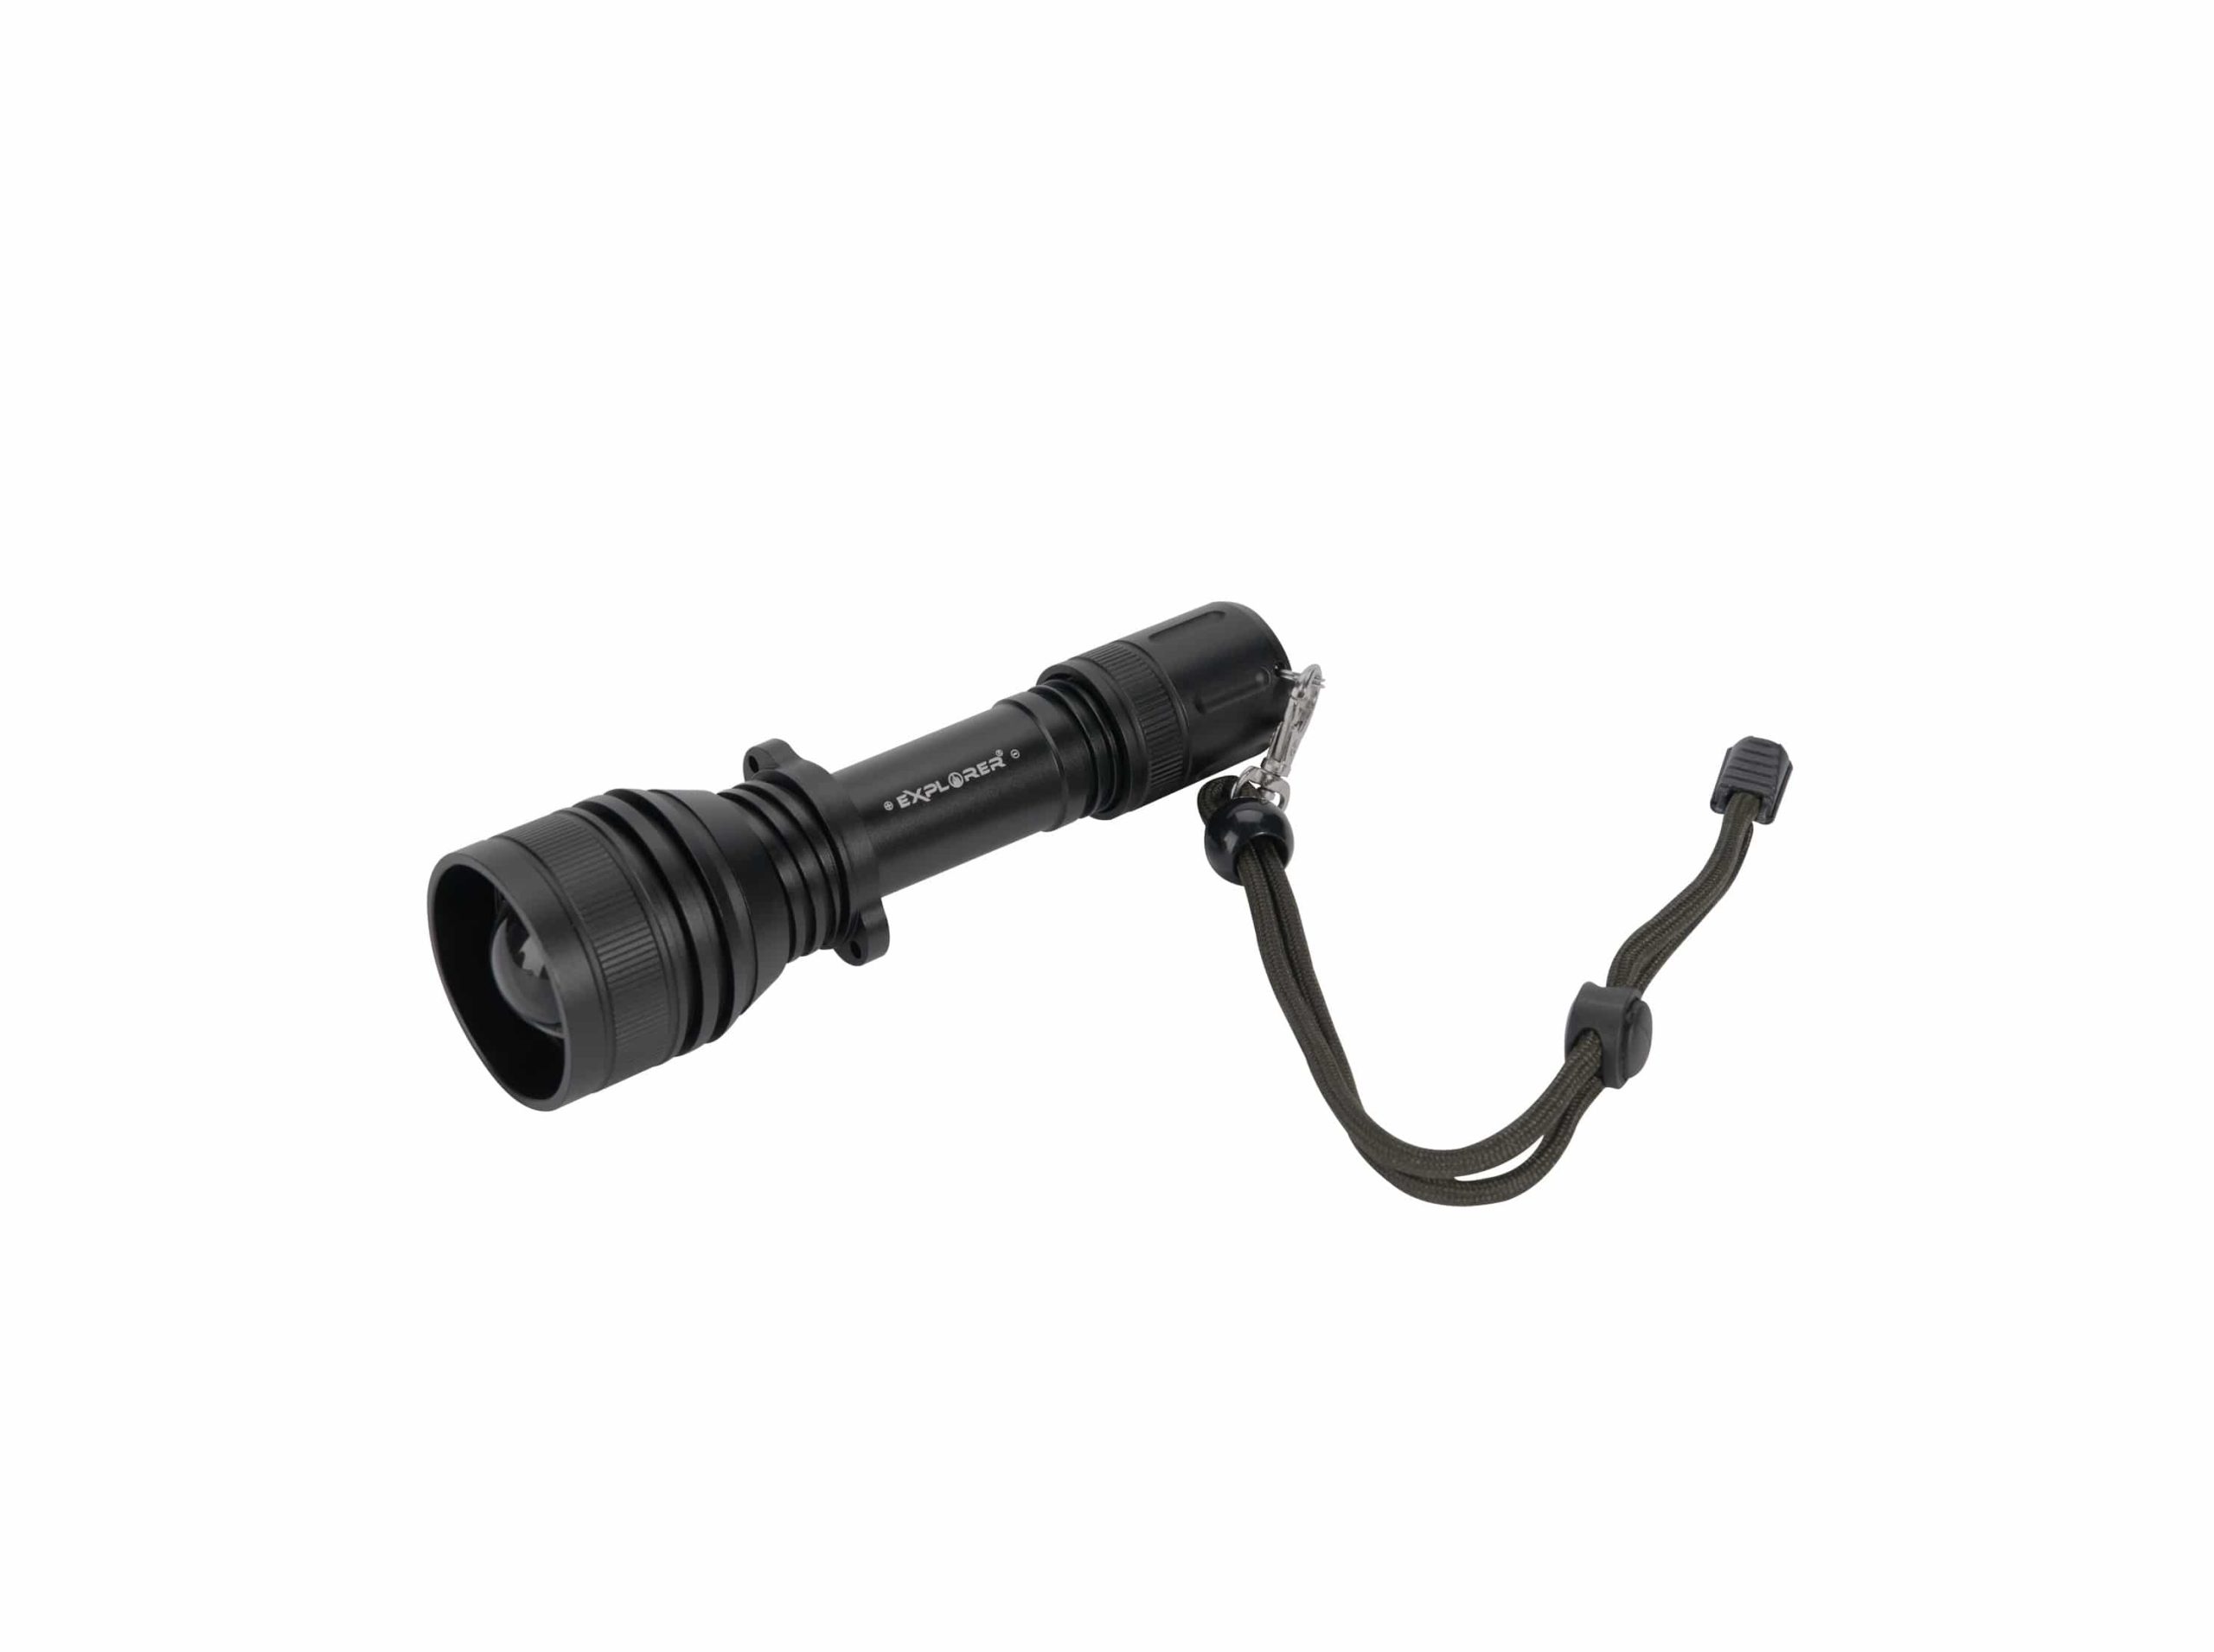 LED WATER RESISTANT TORCH 450 LUMENS